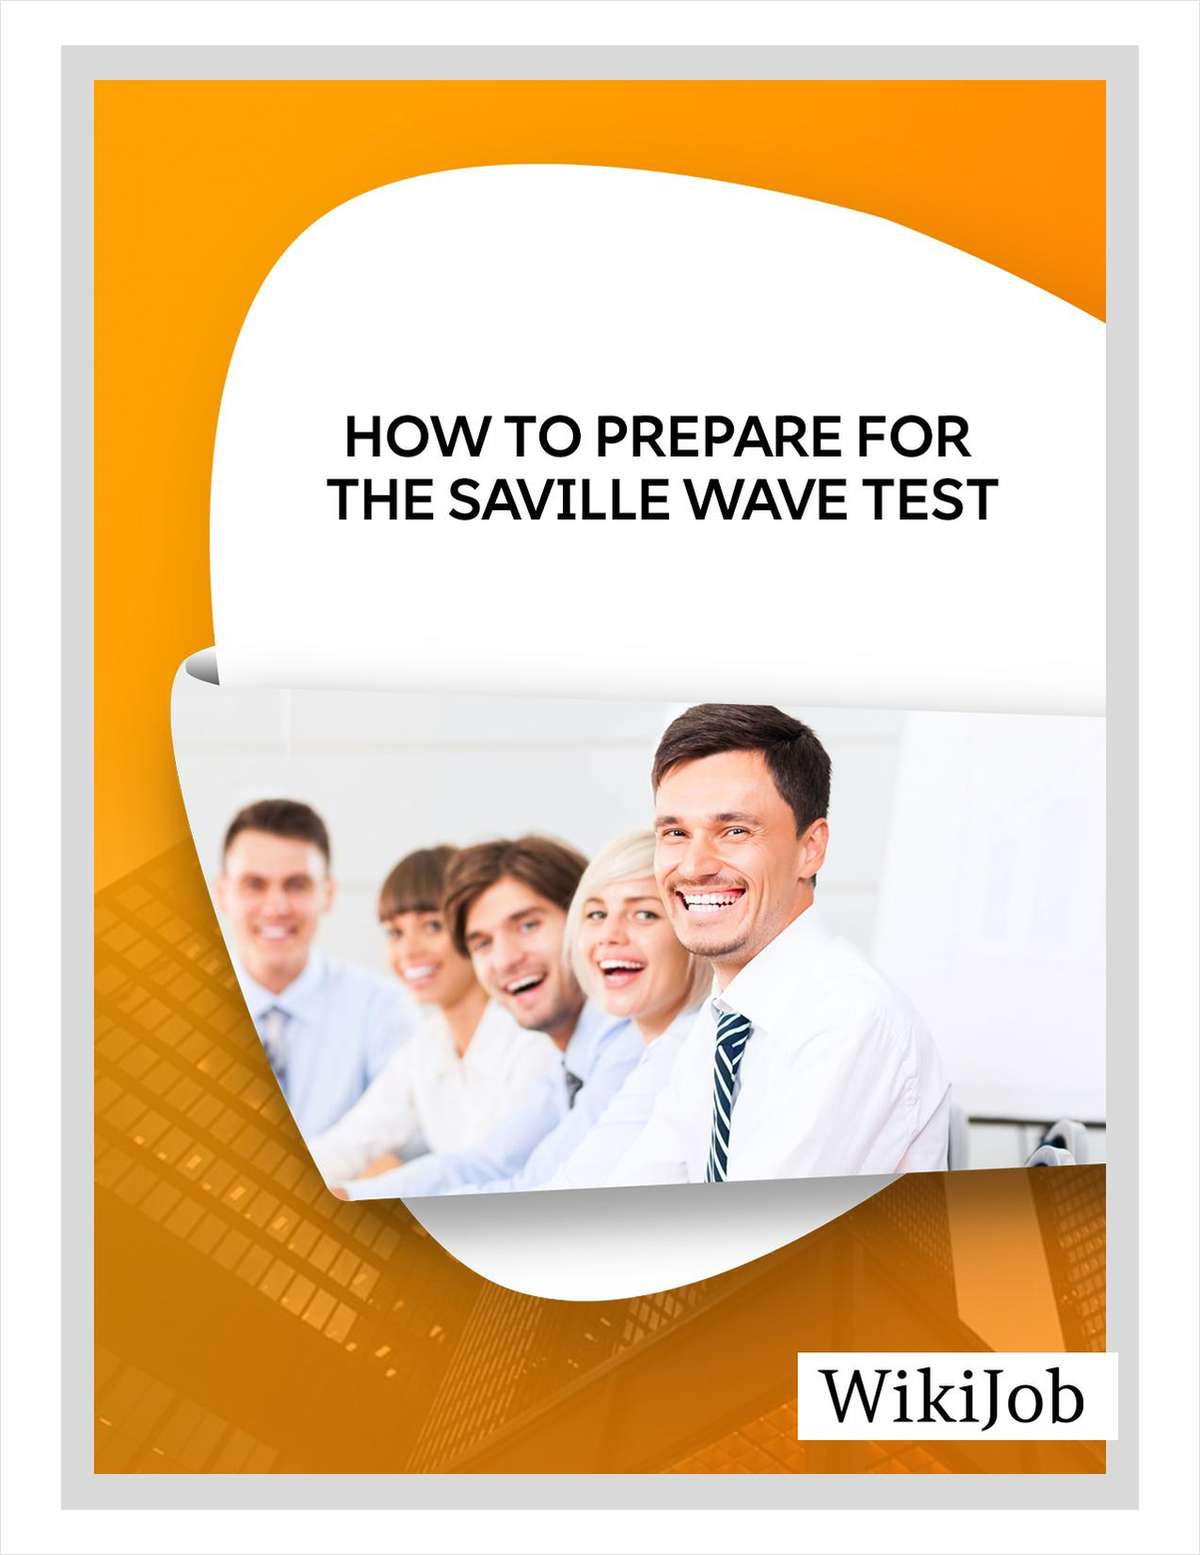 How to Prepare for the Saville Wave Test